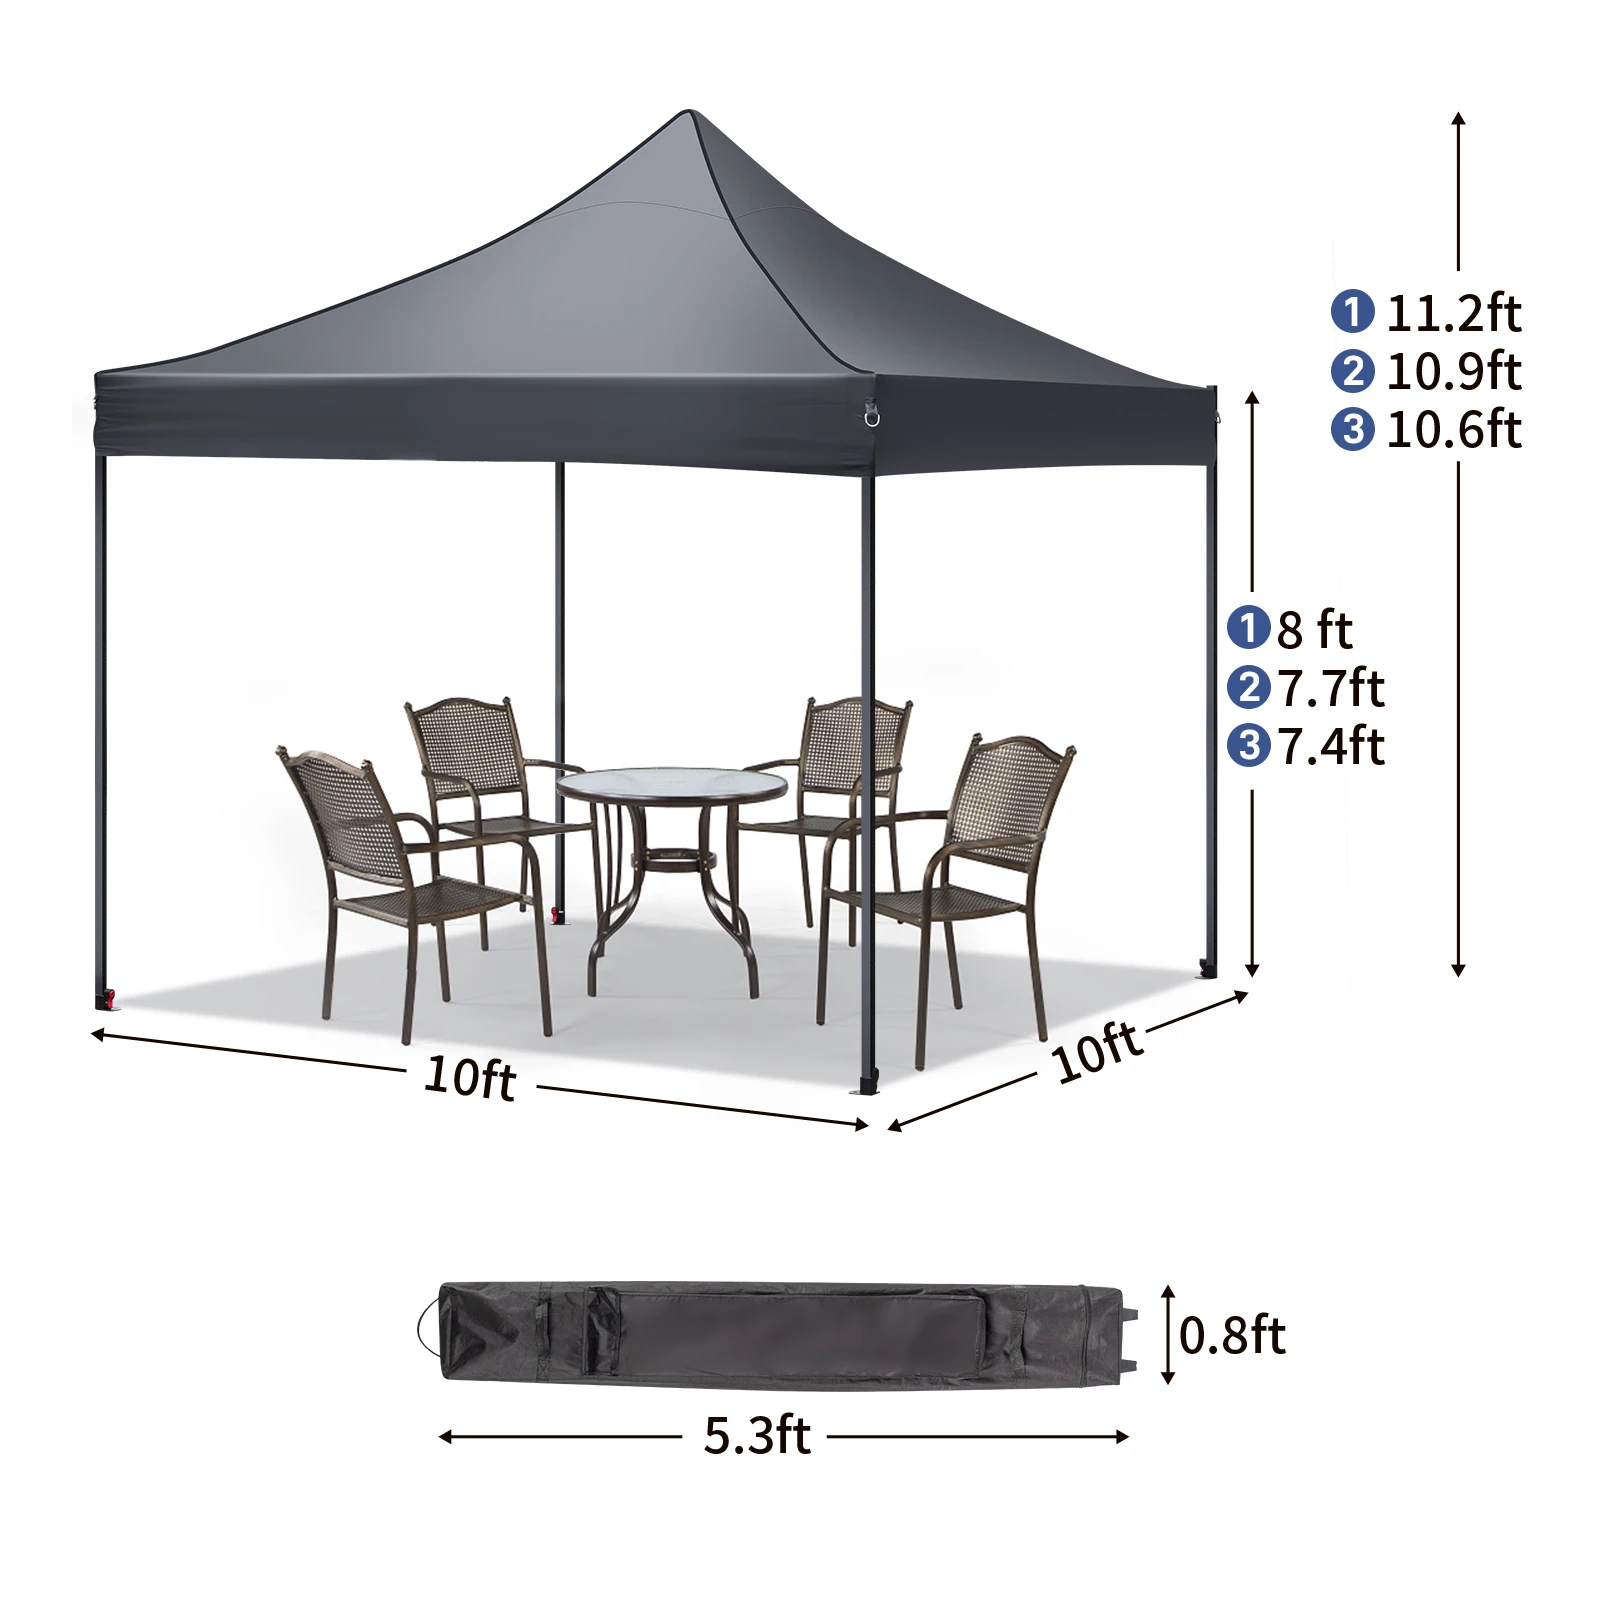 Best Choice Products 10x10ft Pop Up Canopy Outdoor Portable Adjustable Instant Gazebo Tent w/ Carrying Bag - Light Gray